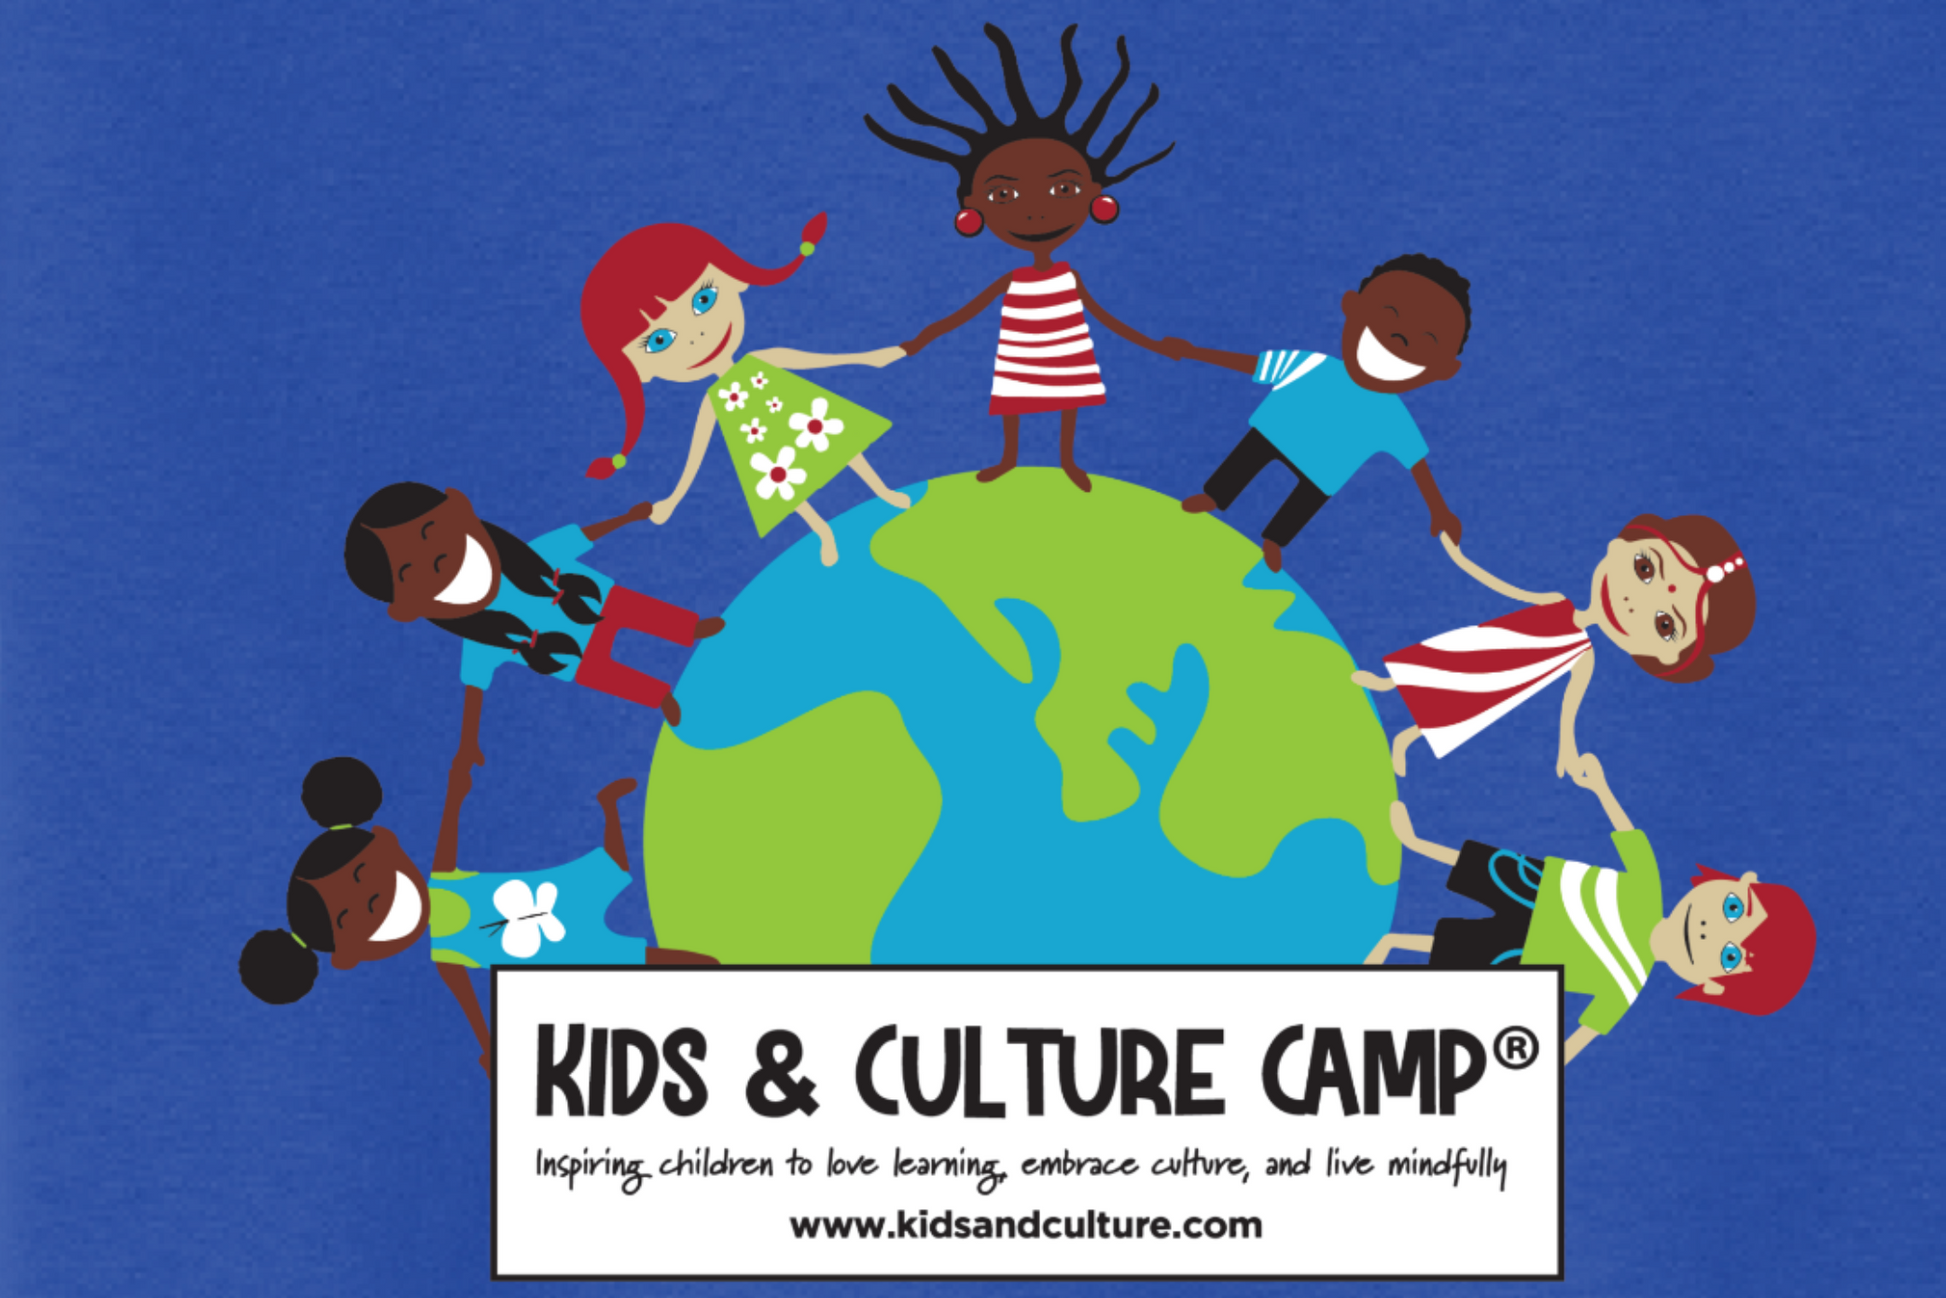 Close up of the Royal blue short sleeved t-shirt with globe logo. Children of different ethnicities are holding hands around the globe. The words Kids & Culture Camp Inspiring Children to love learning, embrace culture, and live mindfully are underneath the globe. Kids & Culture Camp's web address is underneath the camp name www.kidsandculture.com.